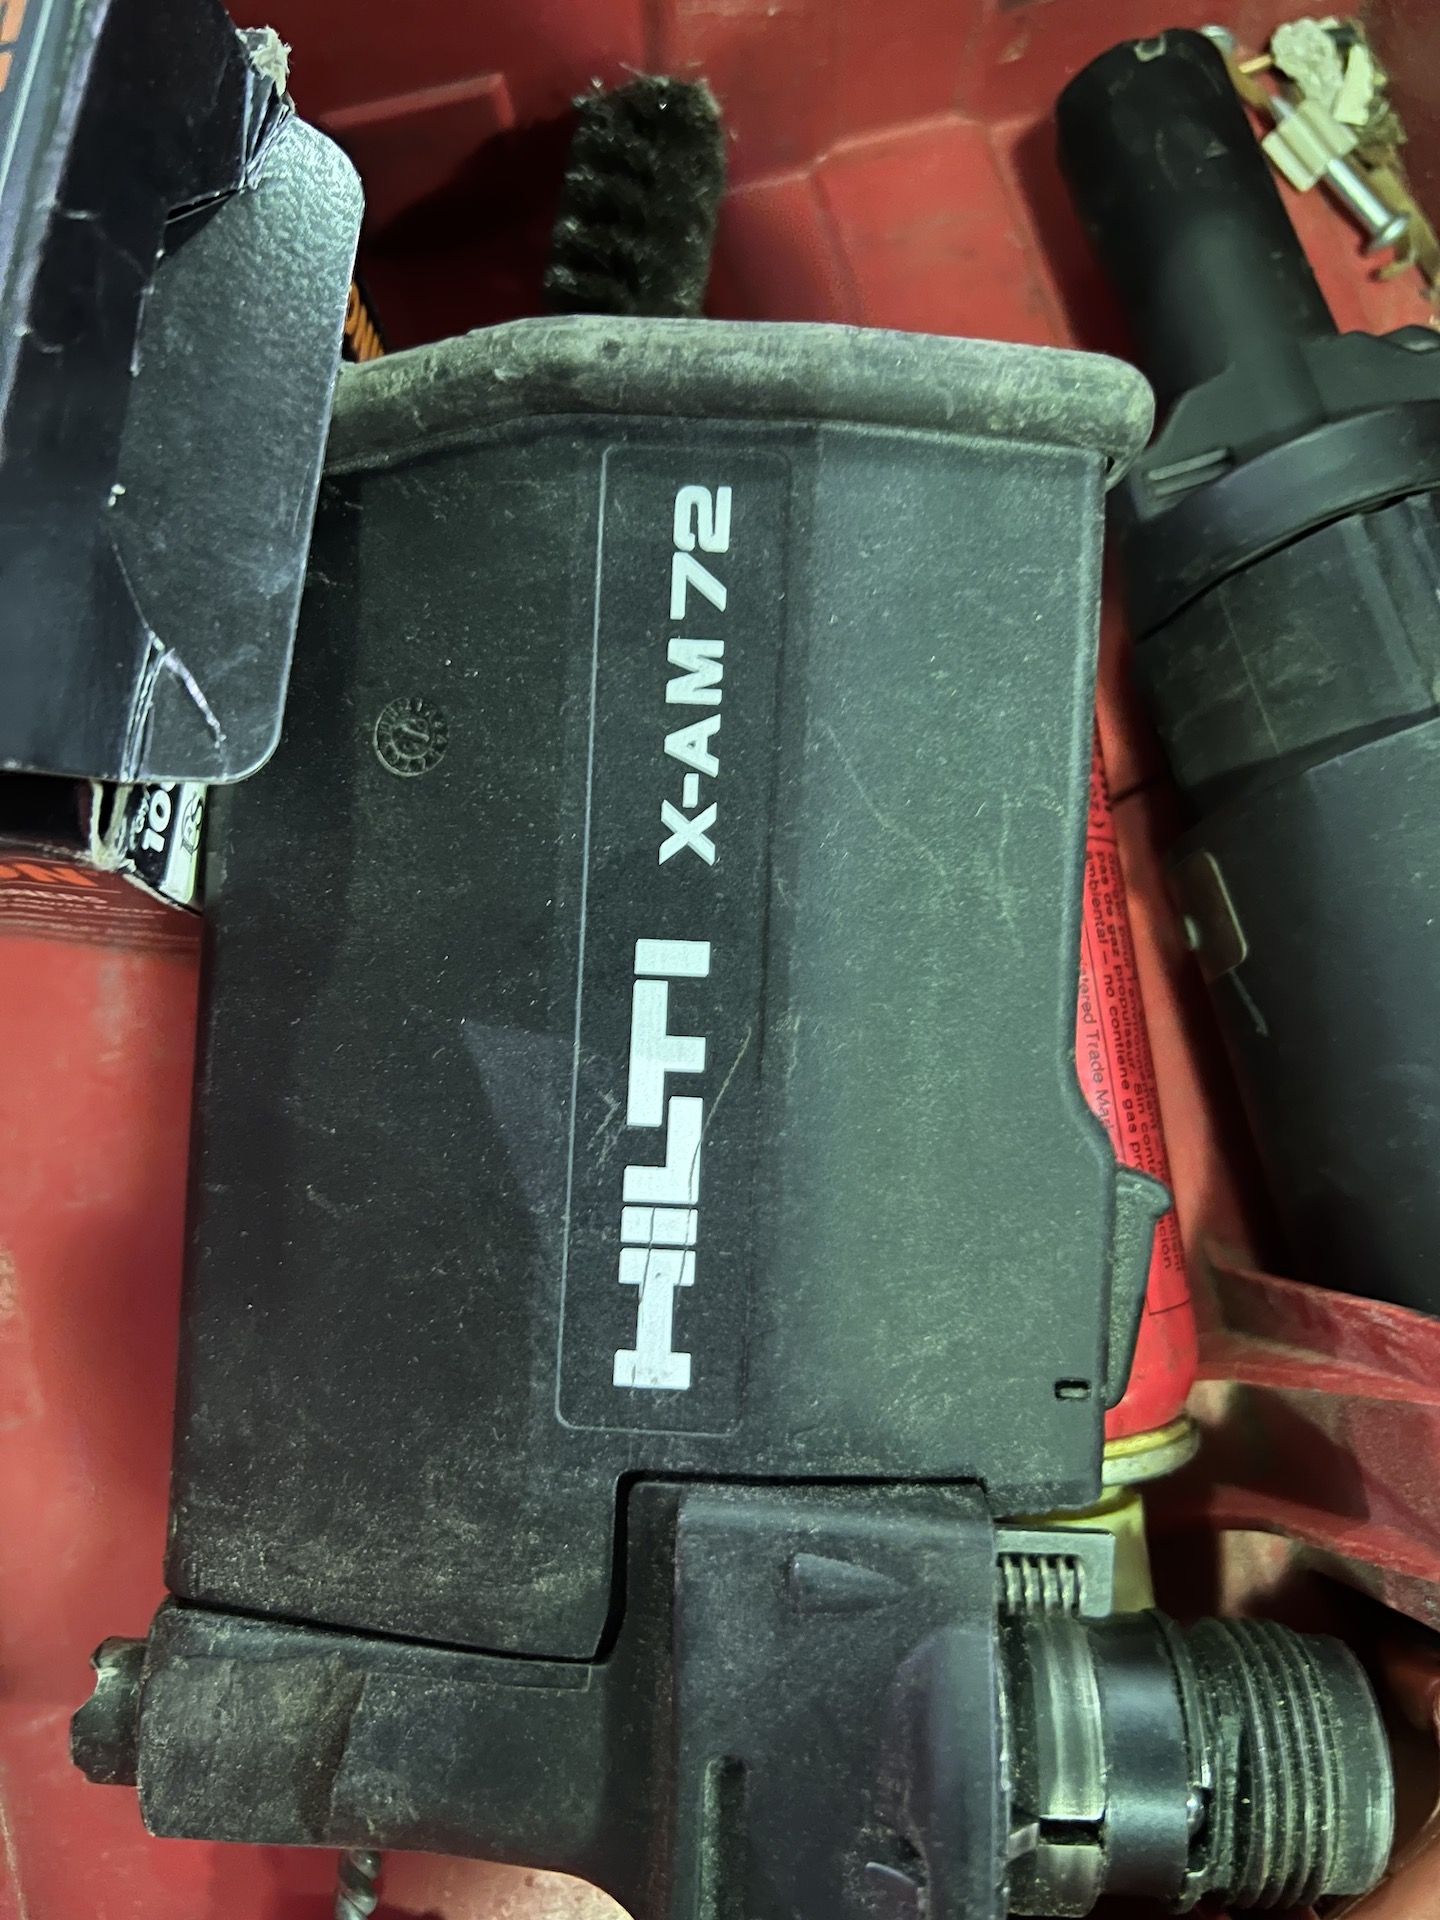 HILTI DX A41 POWDER ACTUATED NAIL GUN WITH X-1M72 MAGAZINE - Image 9 of 13